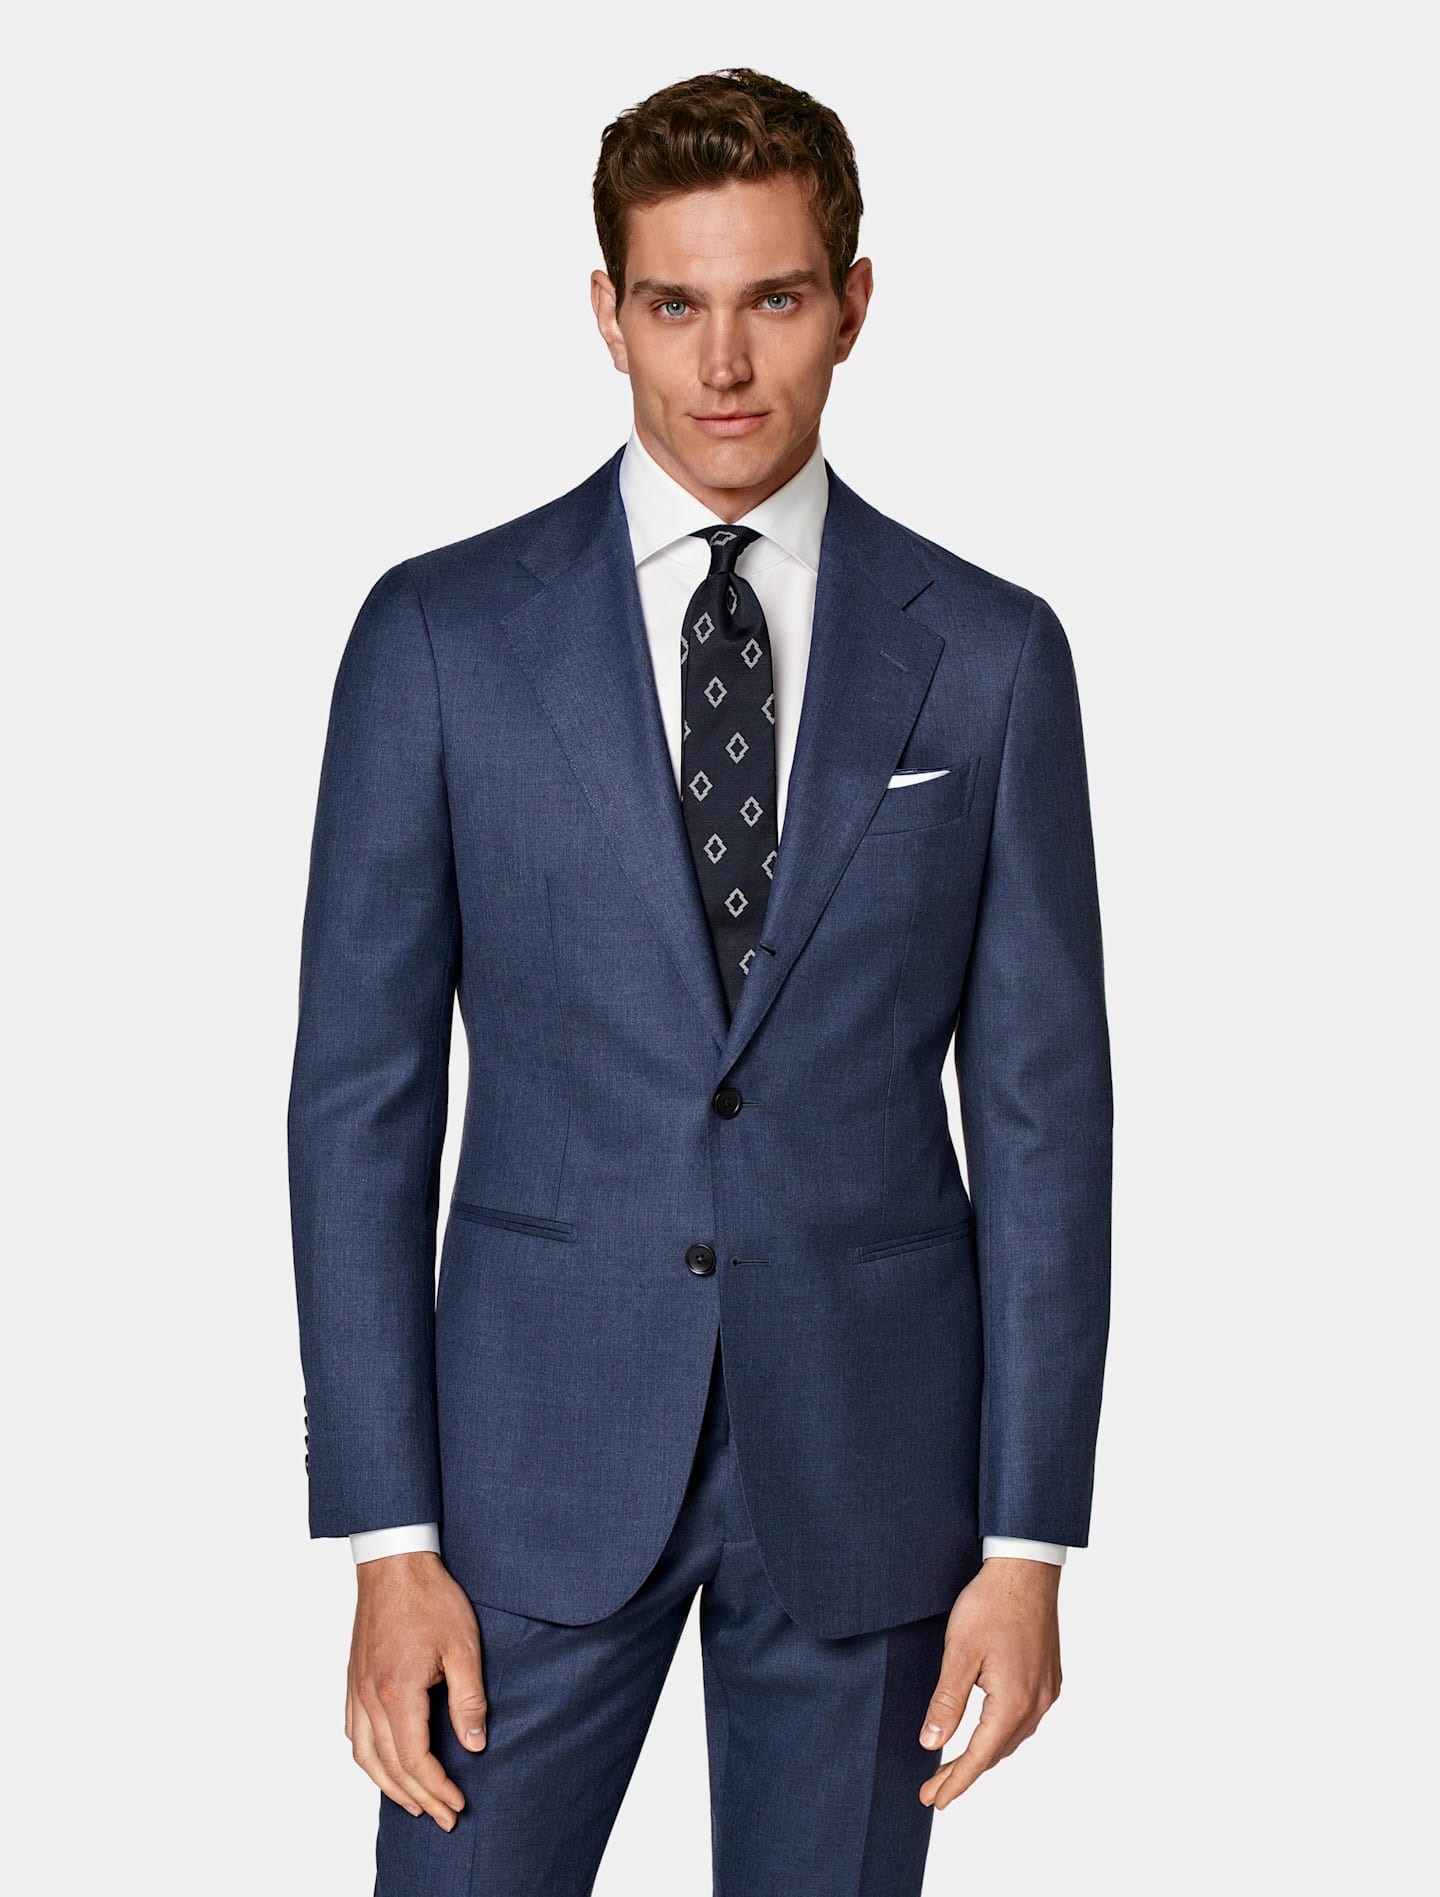 Blue single-breasted suit with white shirt and patterned tie.